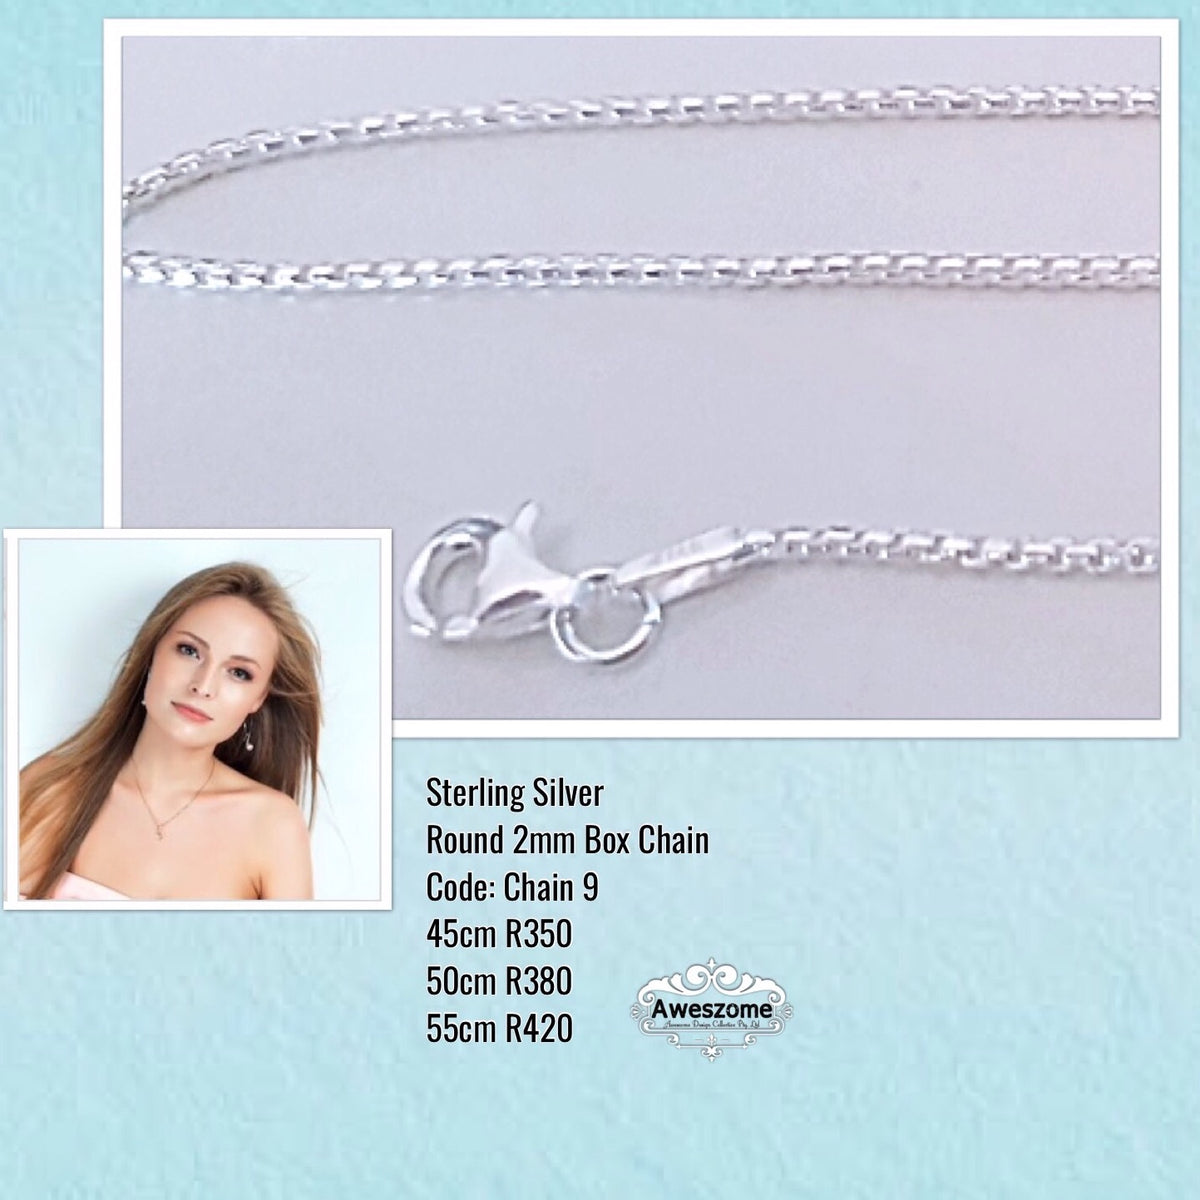 Silver Chain 9 Rounded boxchain